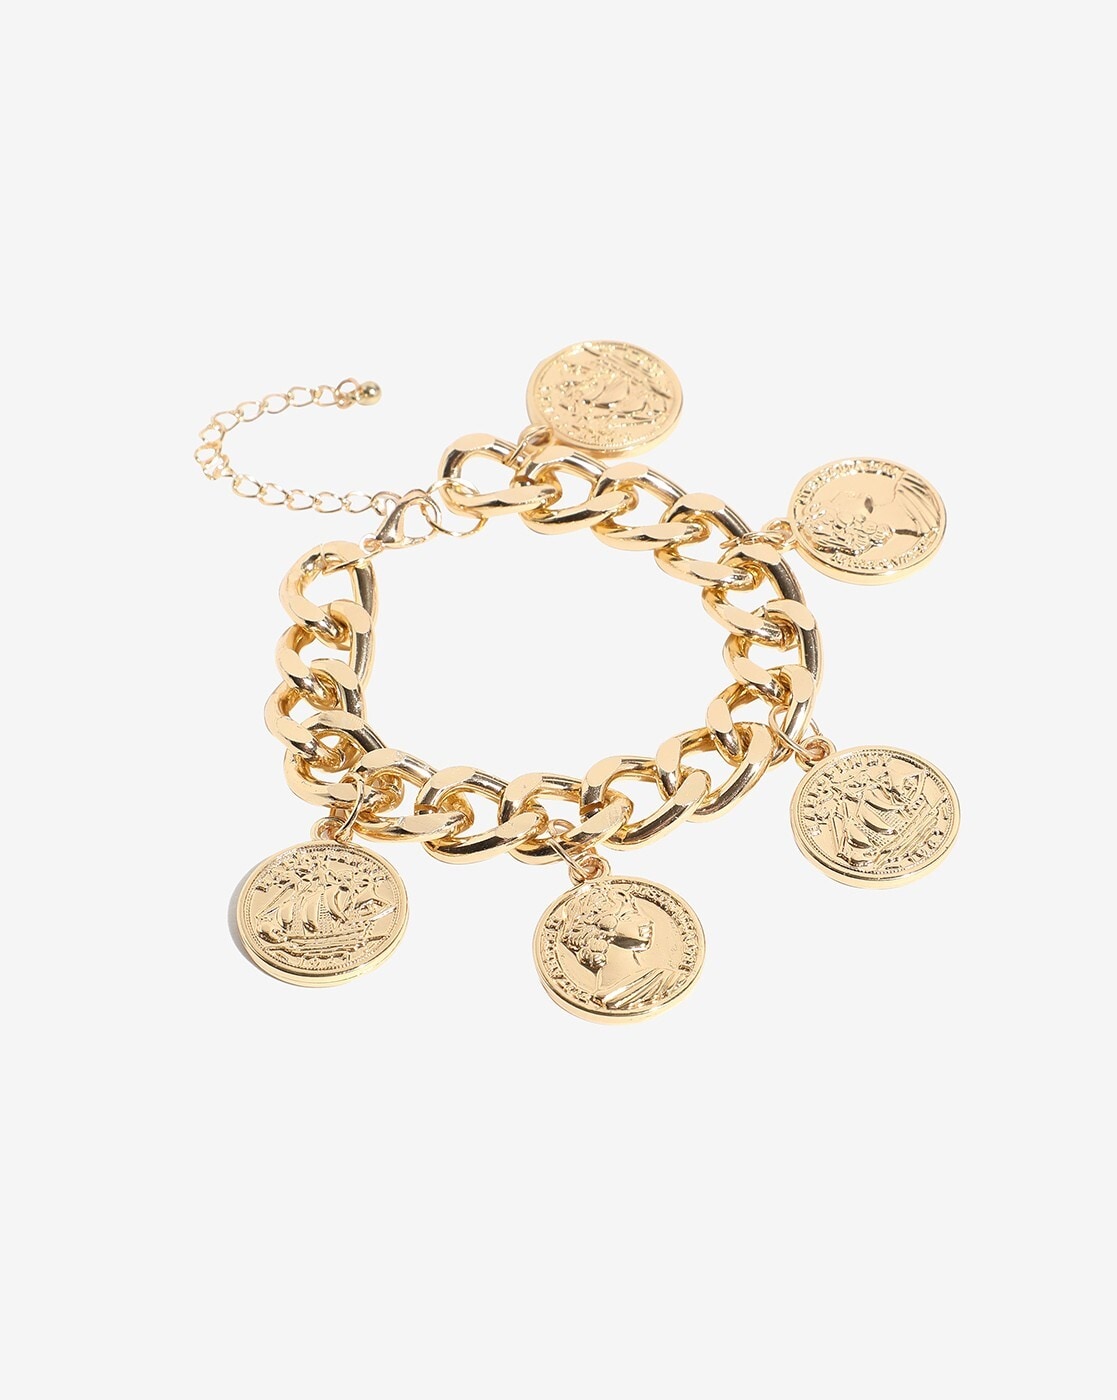 Best personalised charm bracelet chains in solid yellow or rose gold in  Australia